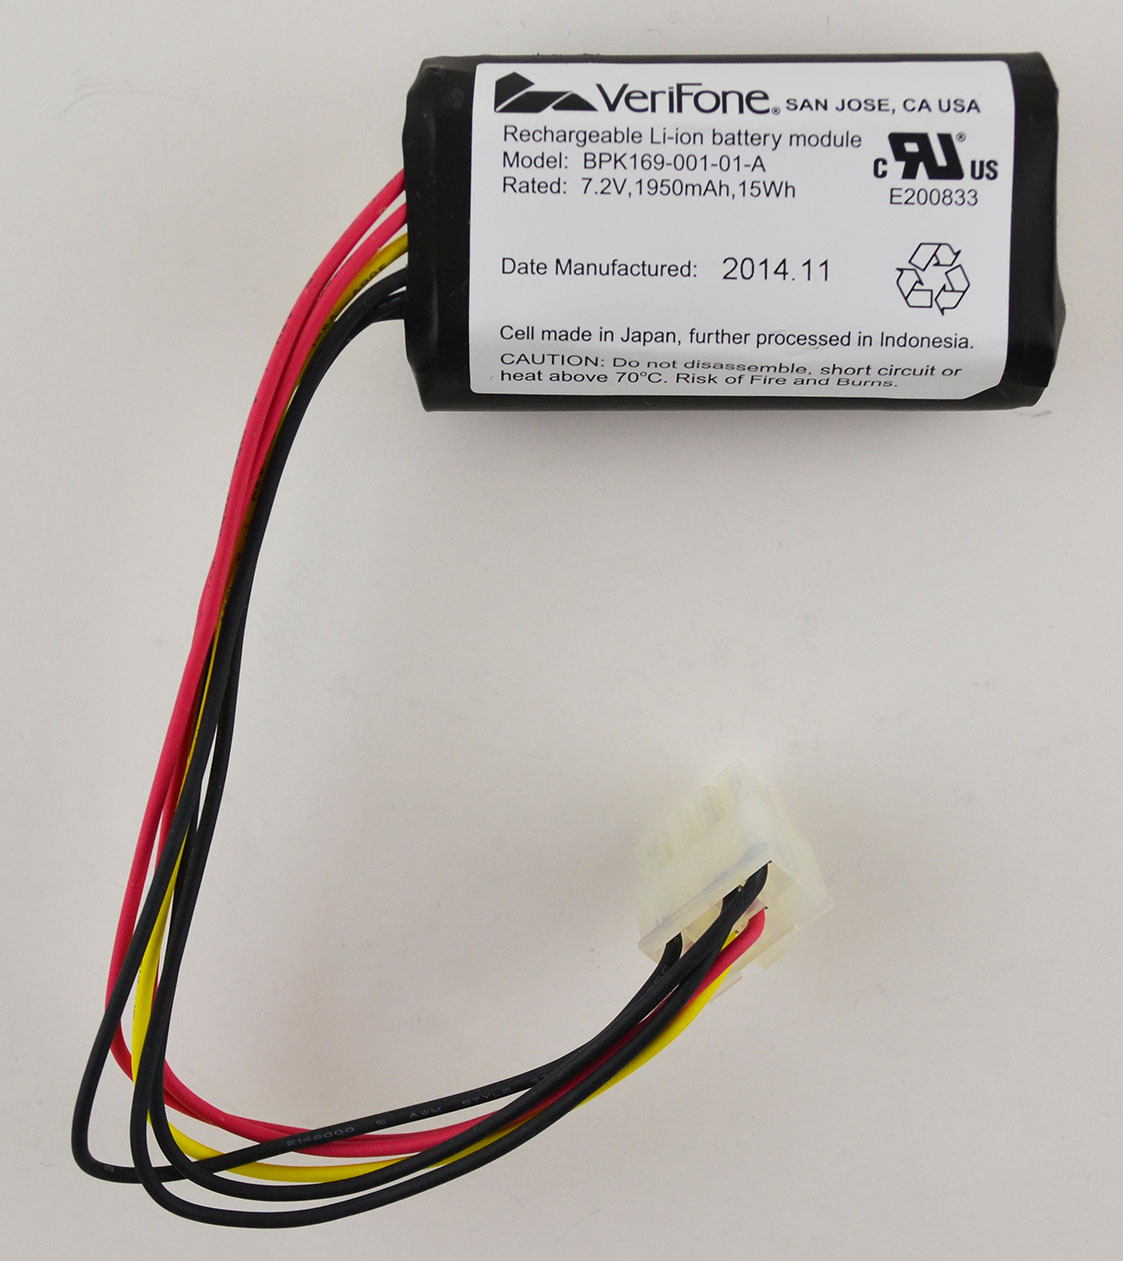 BATTERY PACK FOR RUBY2 AND RUBY CI, Fits Verifone